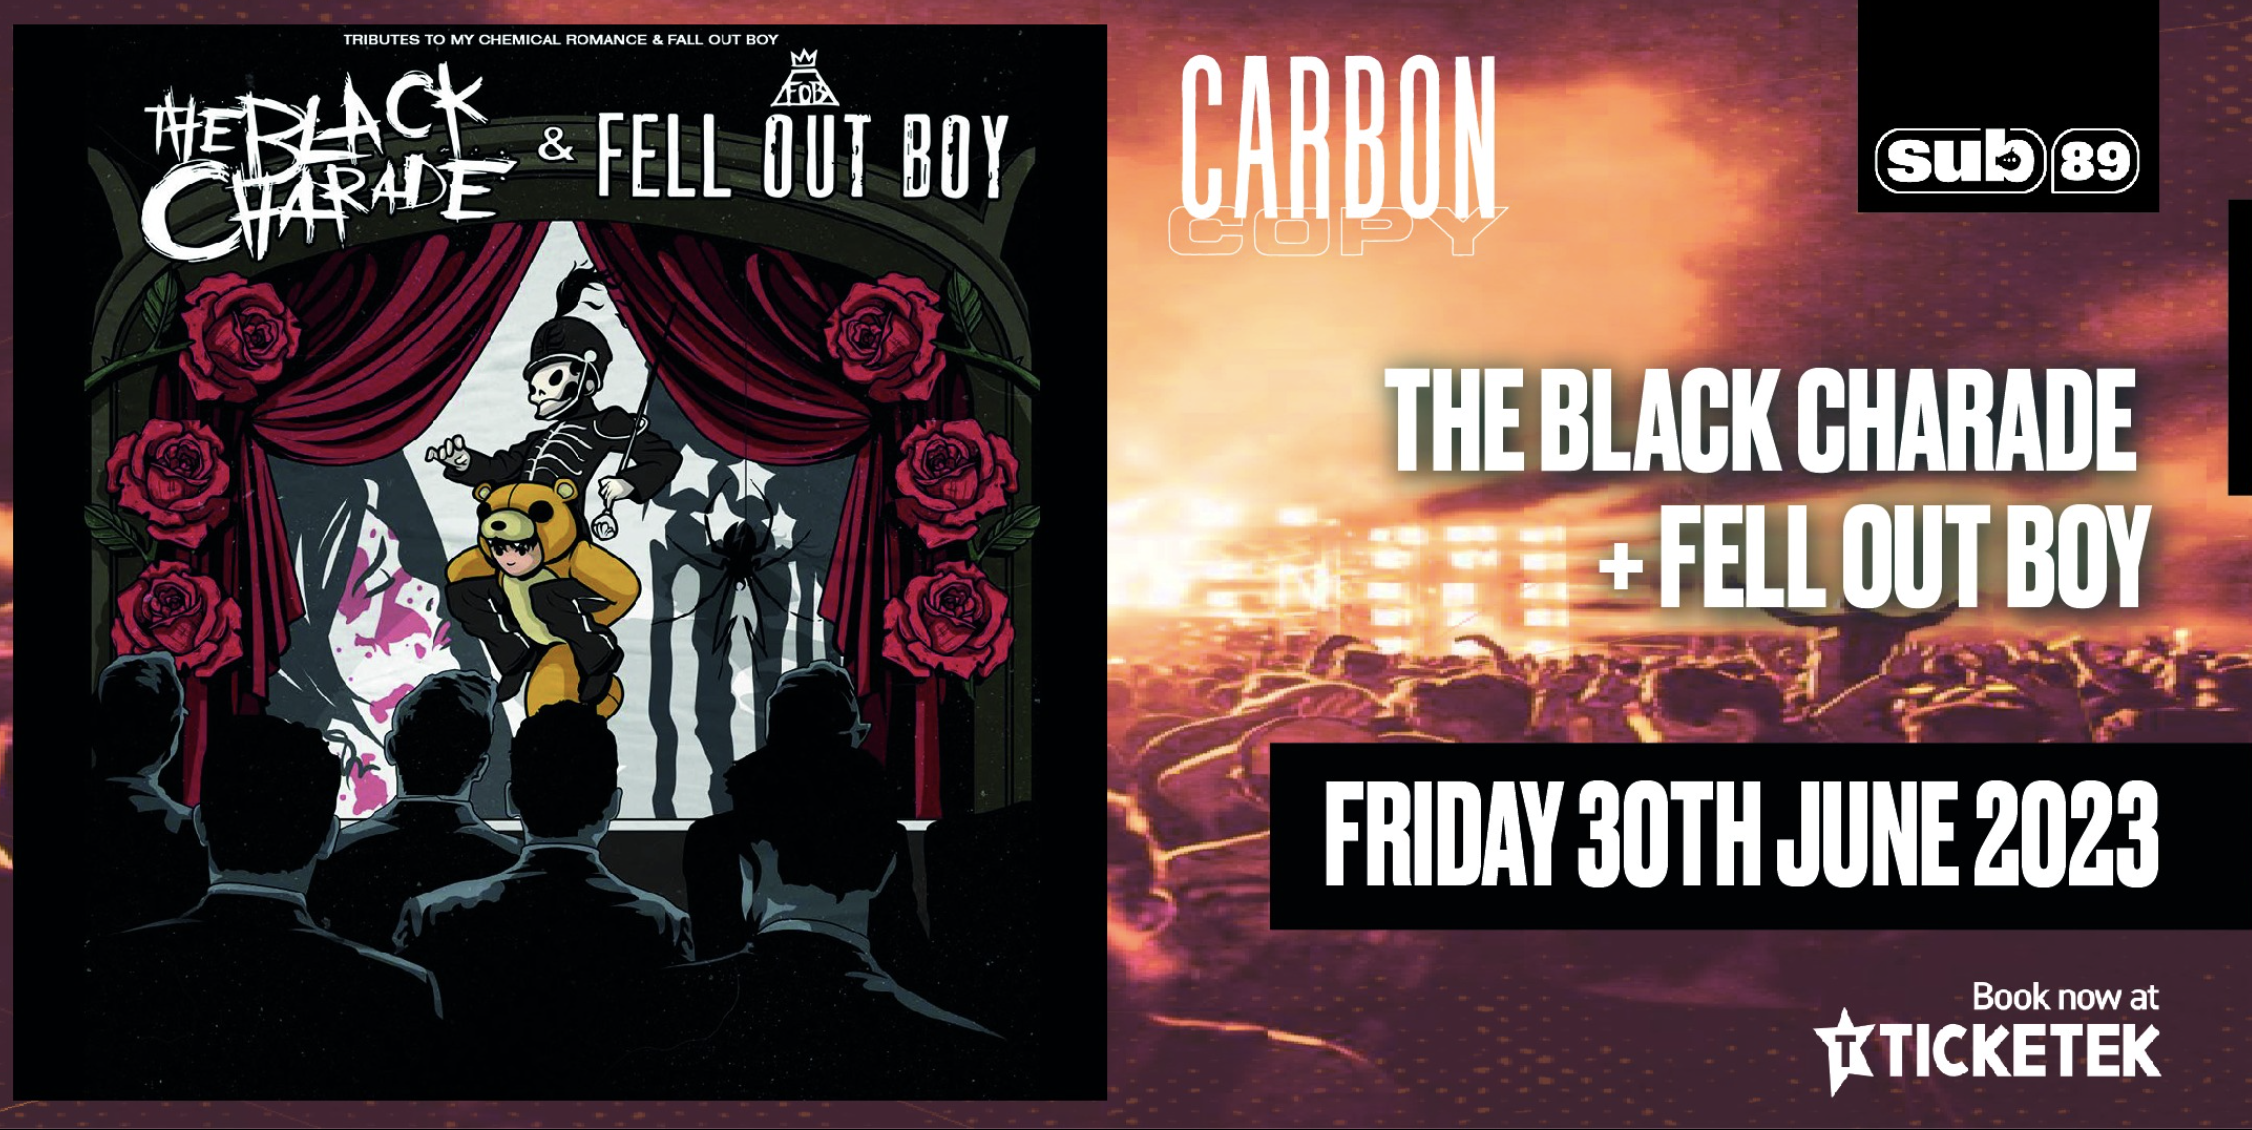 THE BLACK CHARADE AND FELL OUT BOY